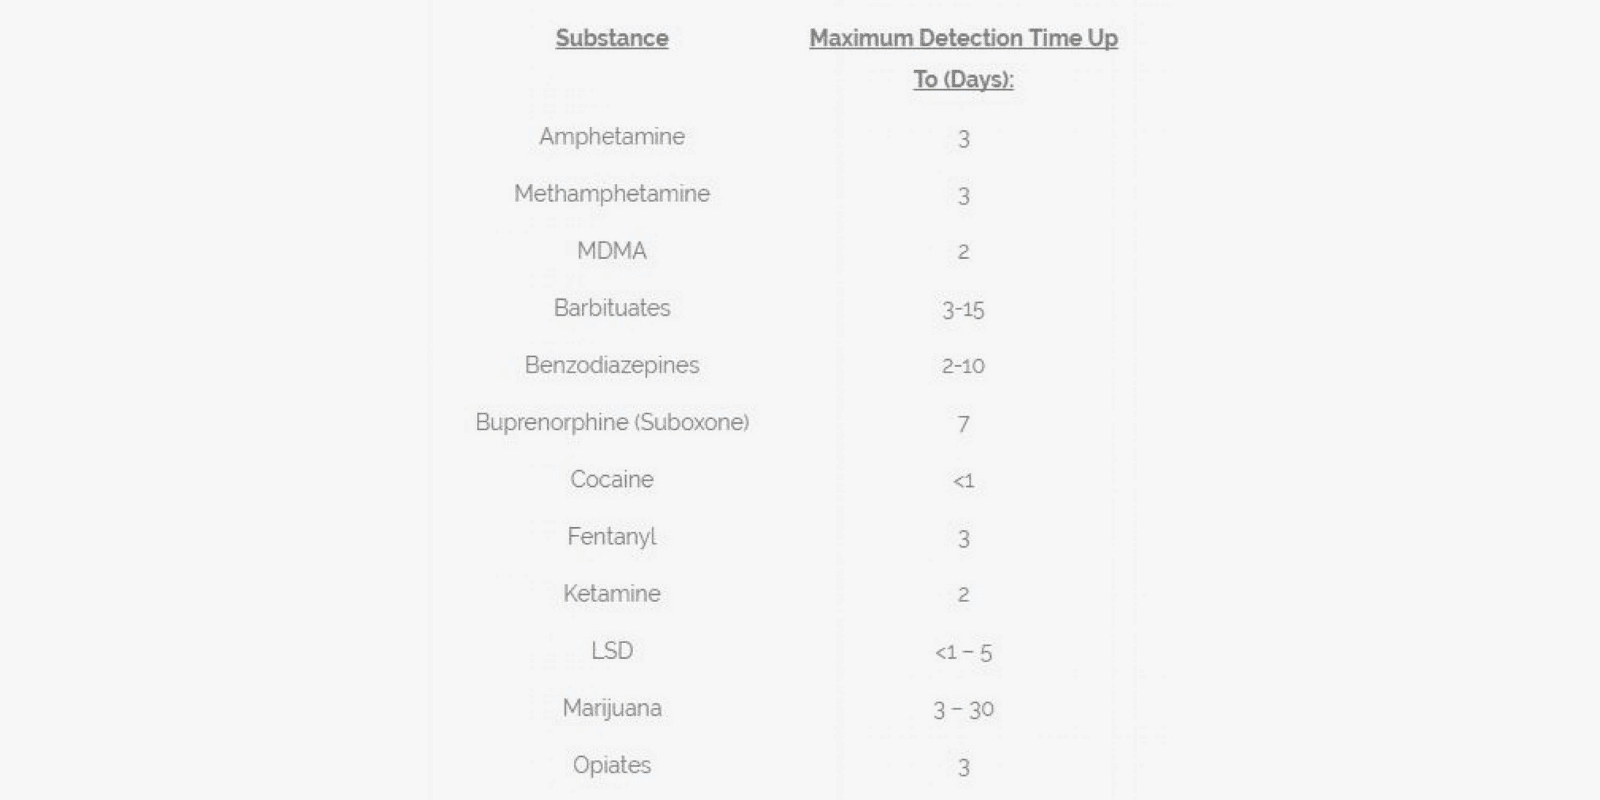 A table that shows maximum detection time per substance